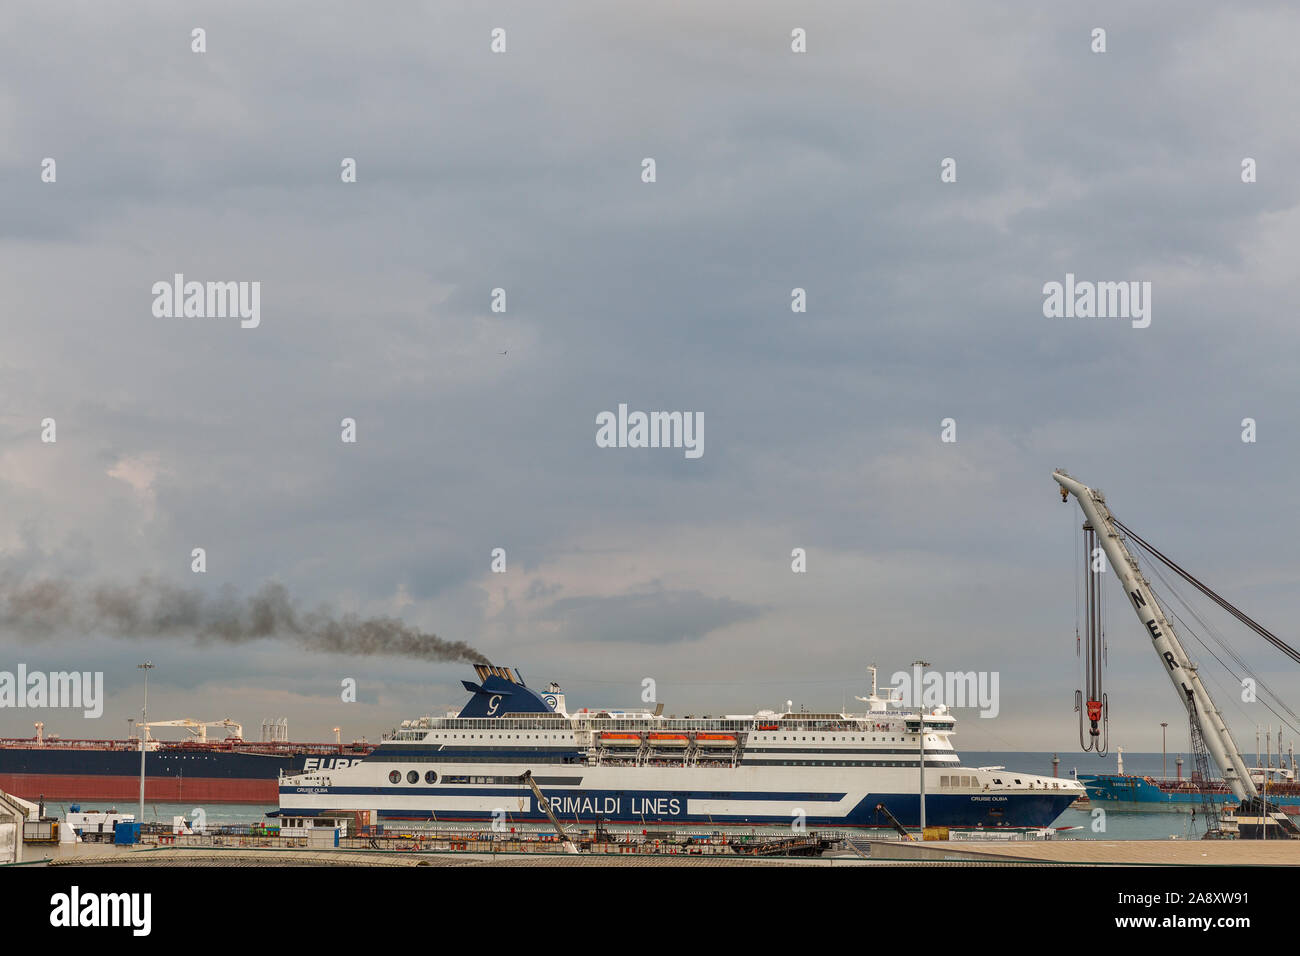 Grimaldi Group High Resolution Stock Photography and Images - Alamy